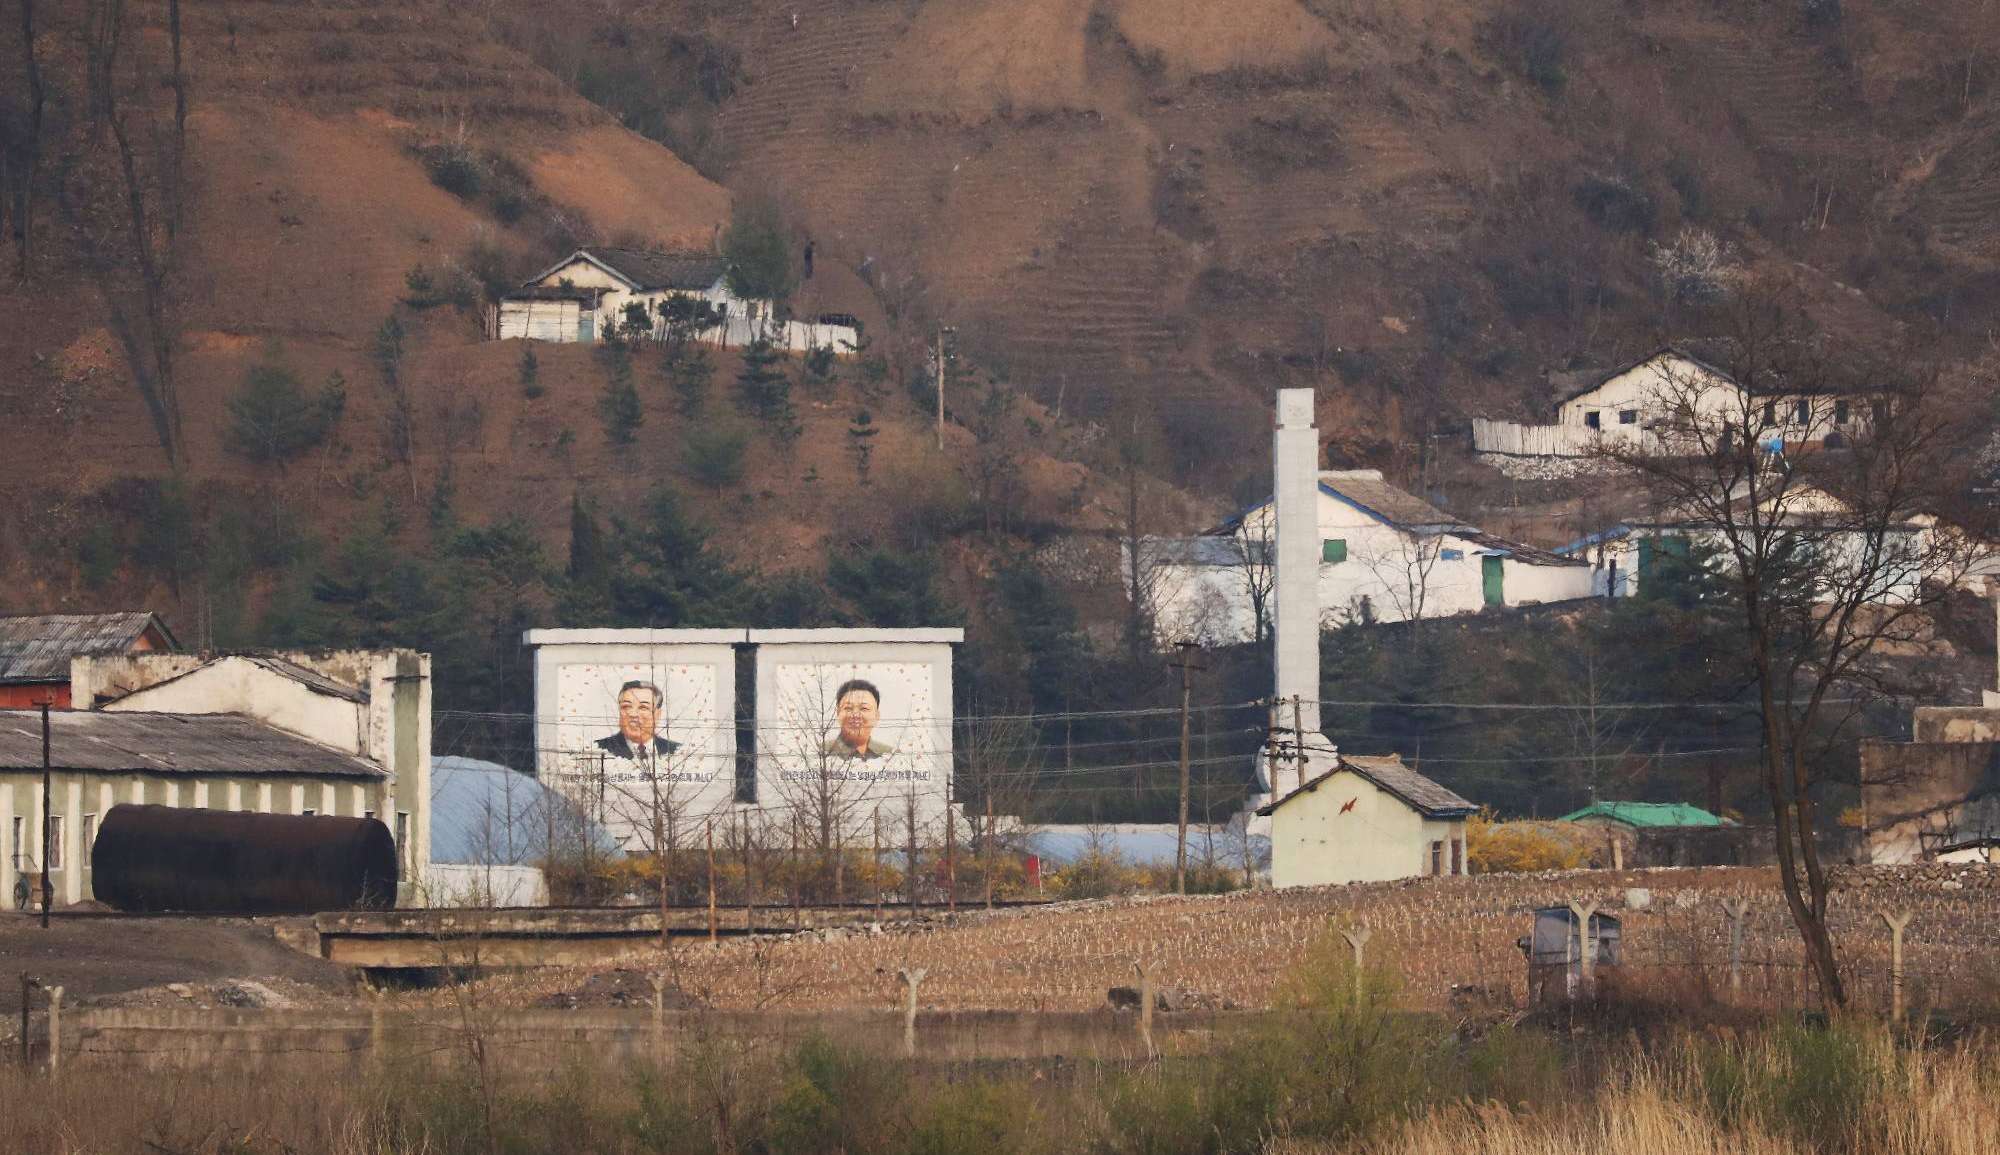 North Korea built a wall on its borders during the